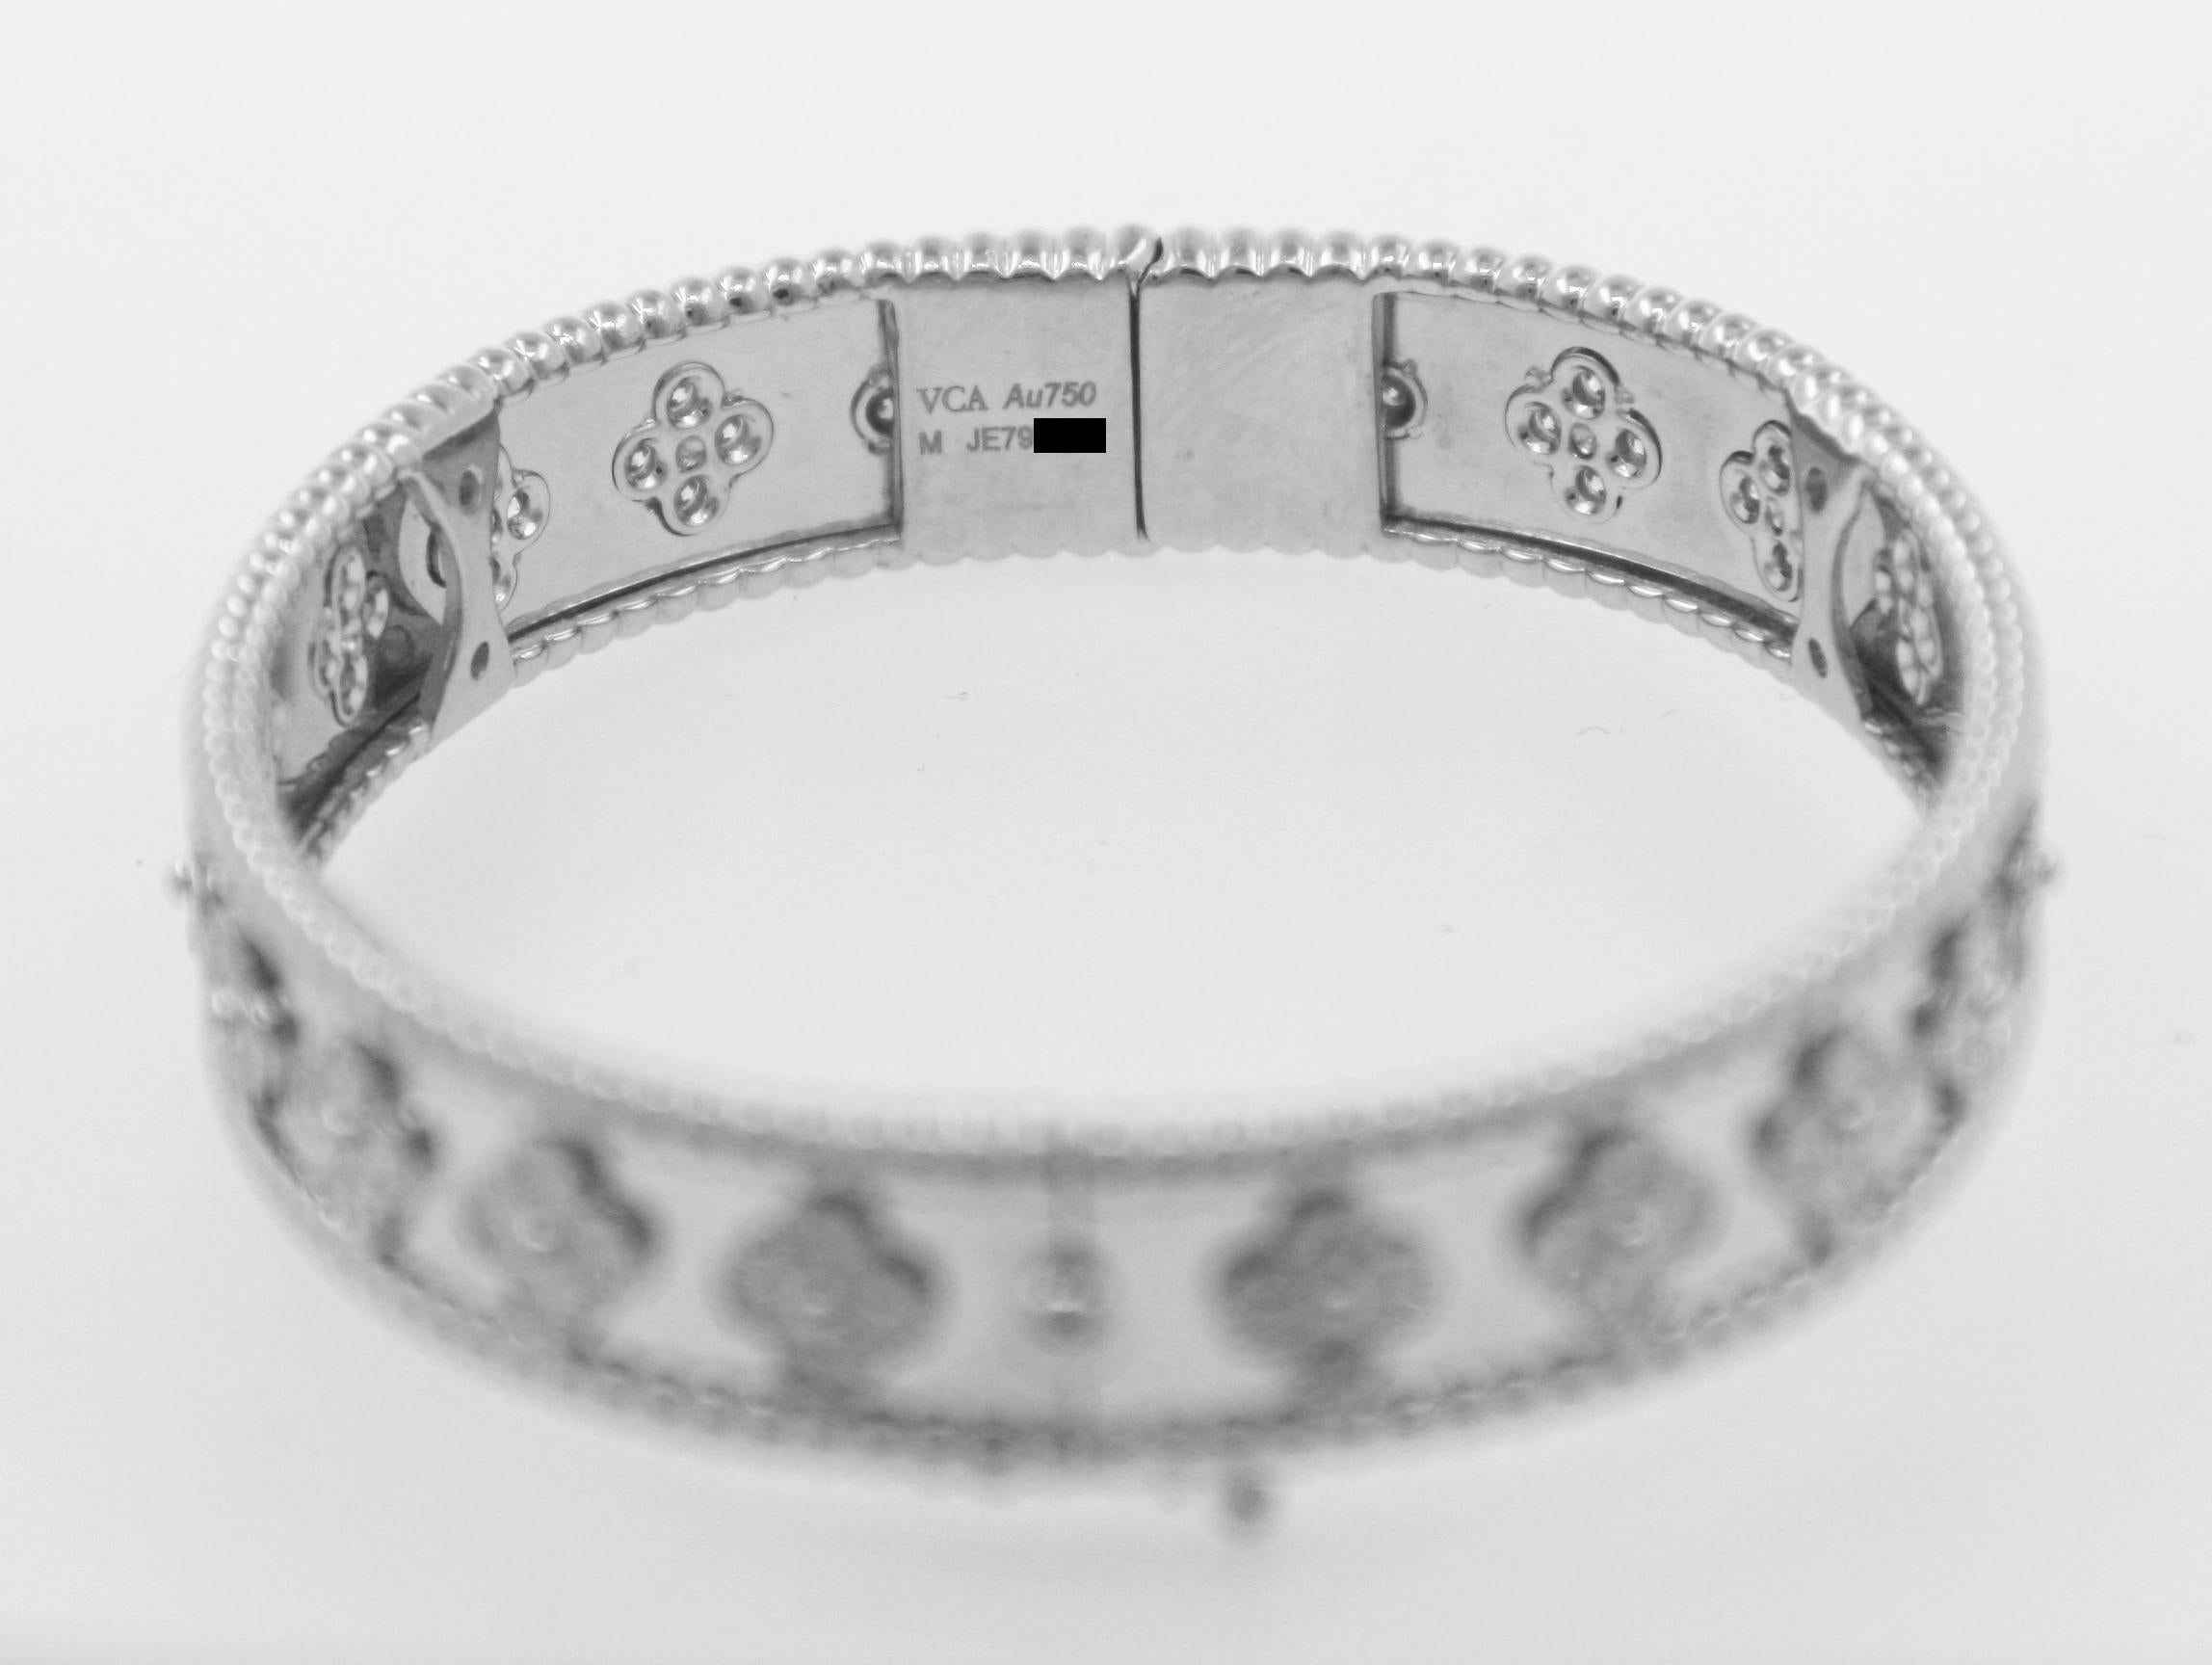 Van Cleef & Arpels Perlée Clovers Bracelet, 18 Karat White Gold, Diamond In Excellent Condition For Sale In New York, NY